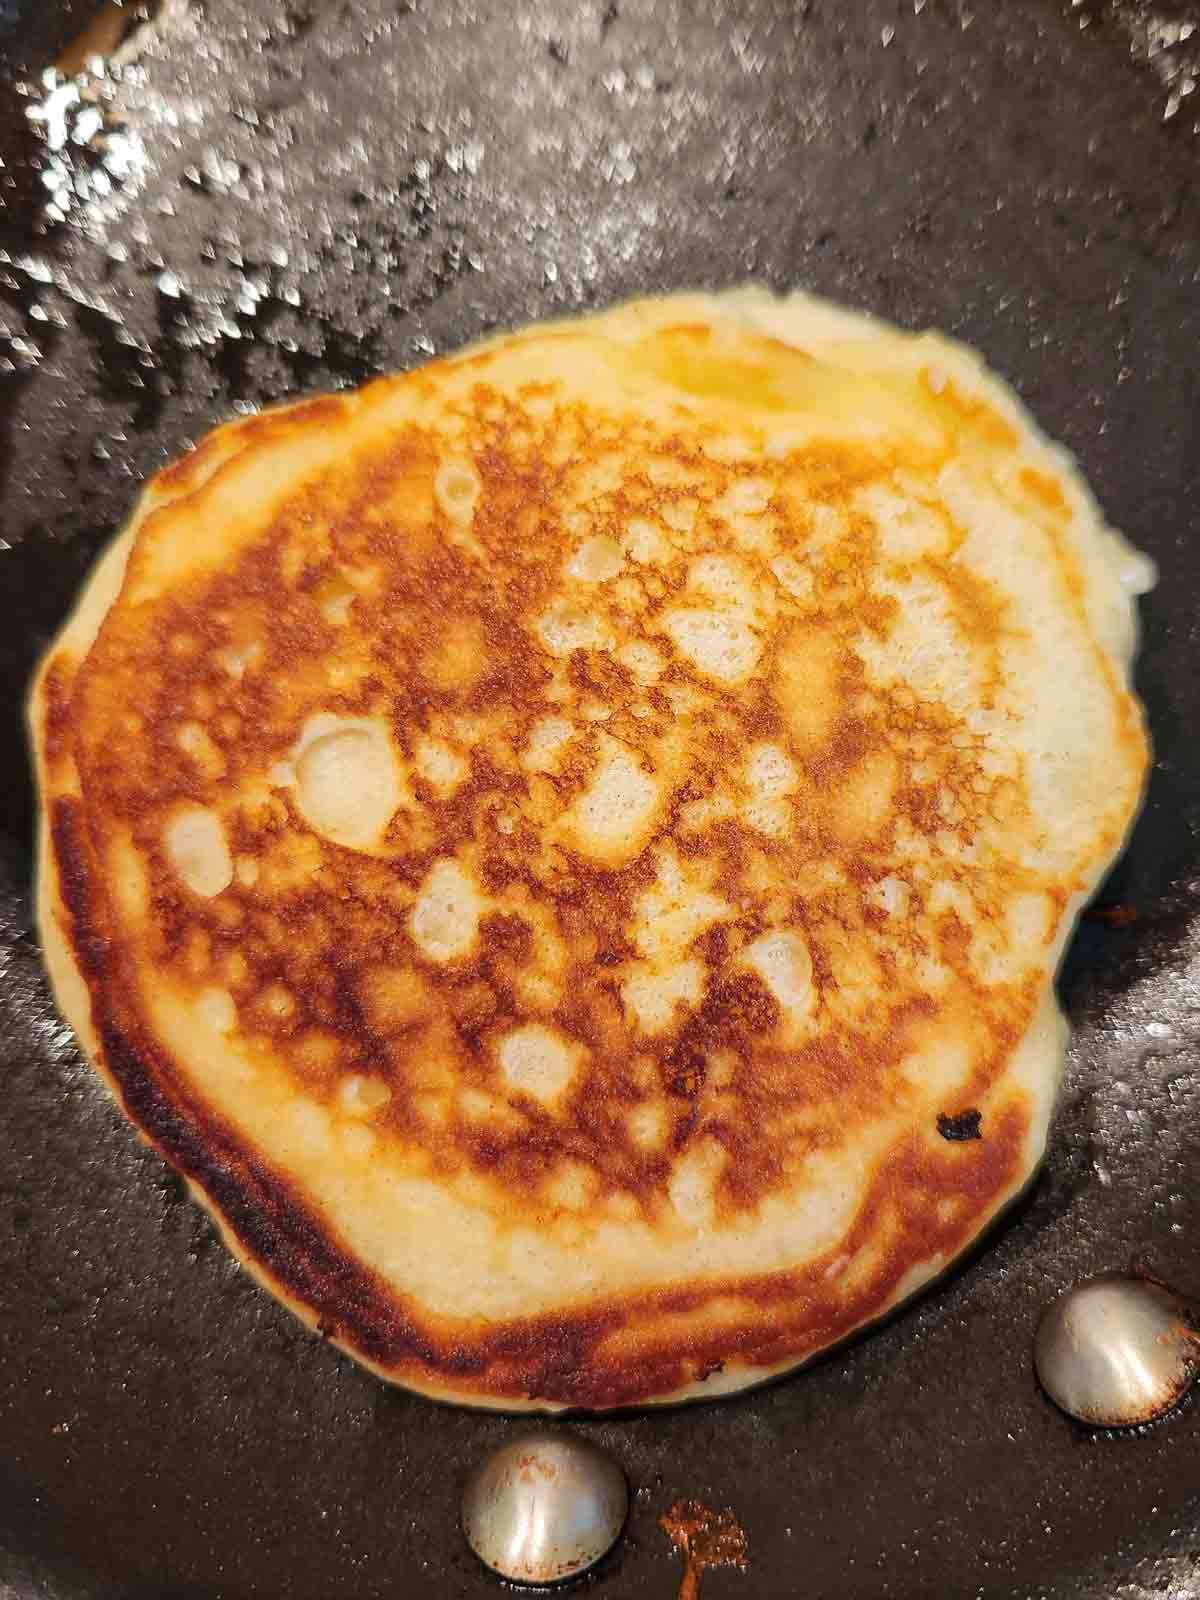 Lemon mascarpone pancake in a skillet that was just flipped with crispy edges.